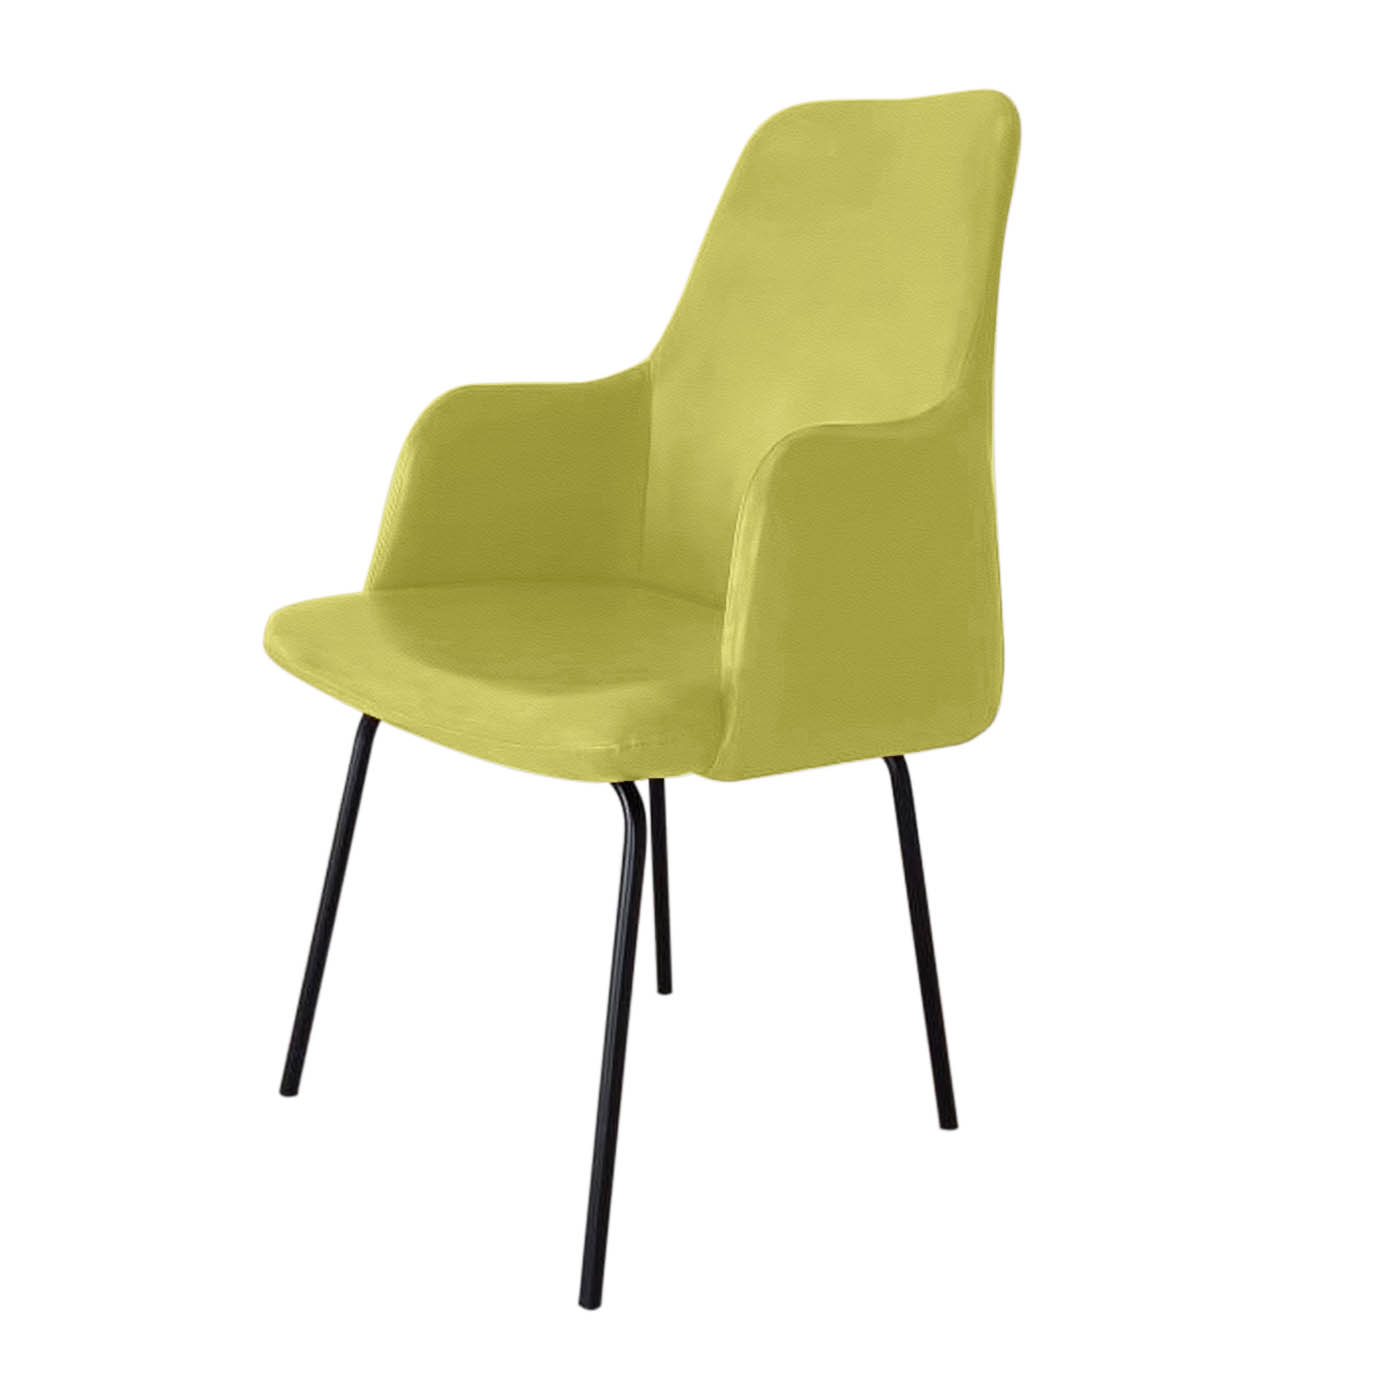 St. Pauli Lime Green Visitors Chair